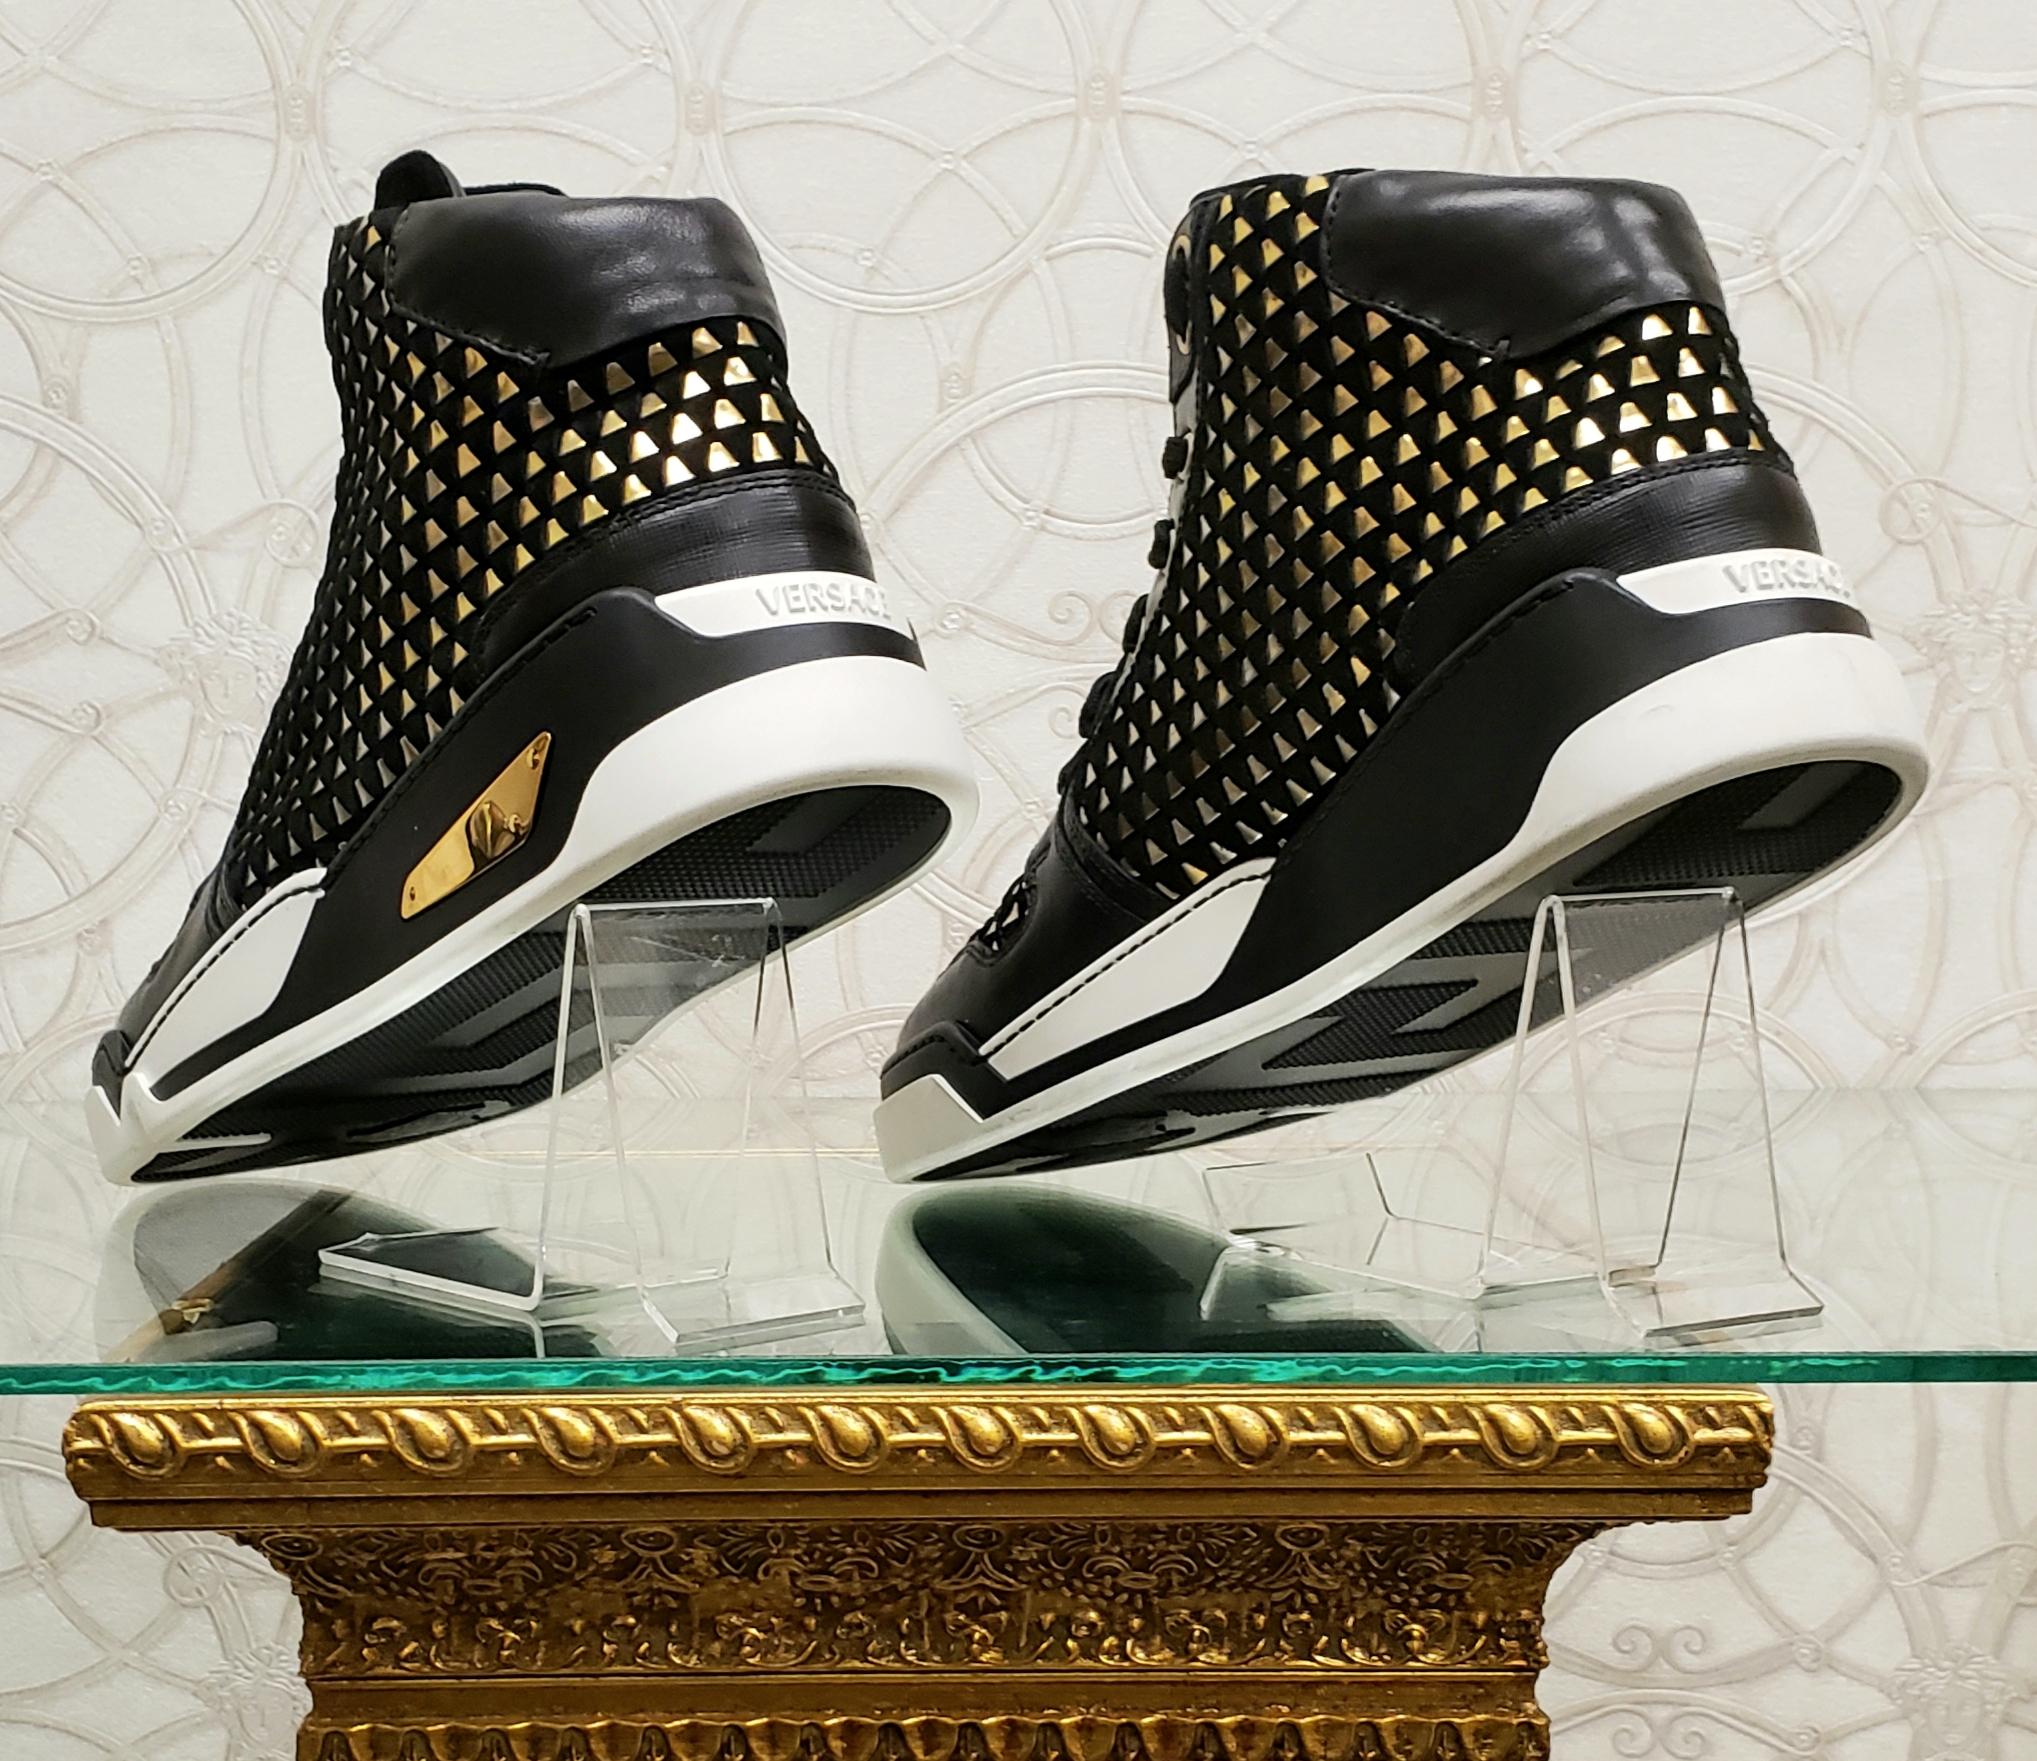 Black NEW VERSACE BLACK SUEDE GOLD WEAVE HIGH-TOP SNEAKERS W/Gold MEDUSA 42 - 9